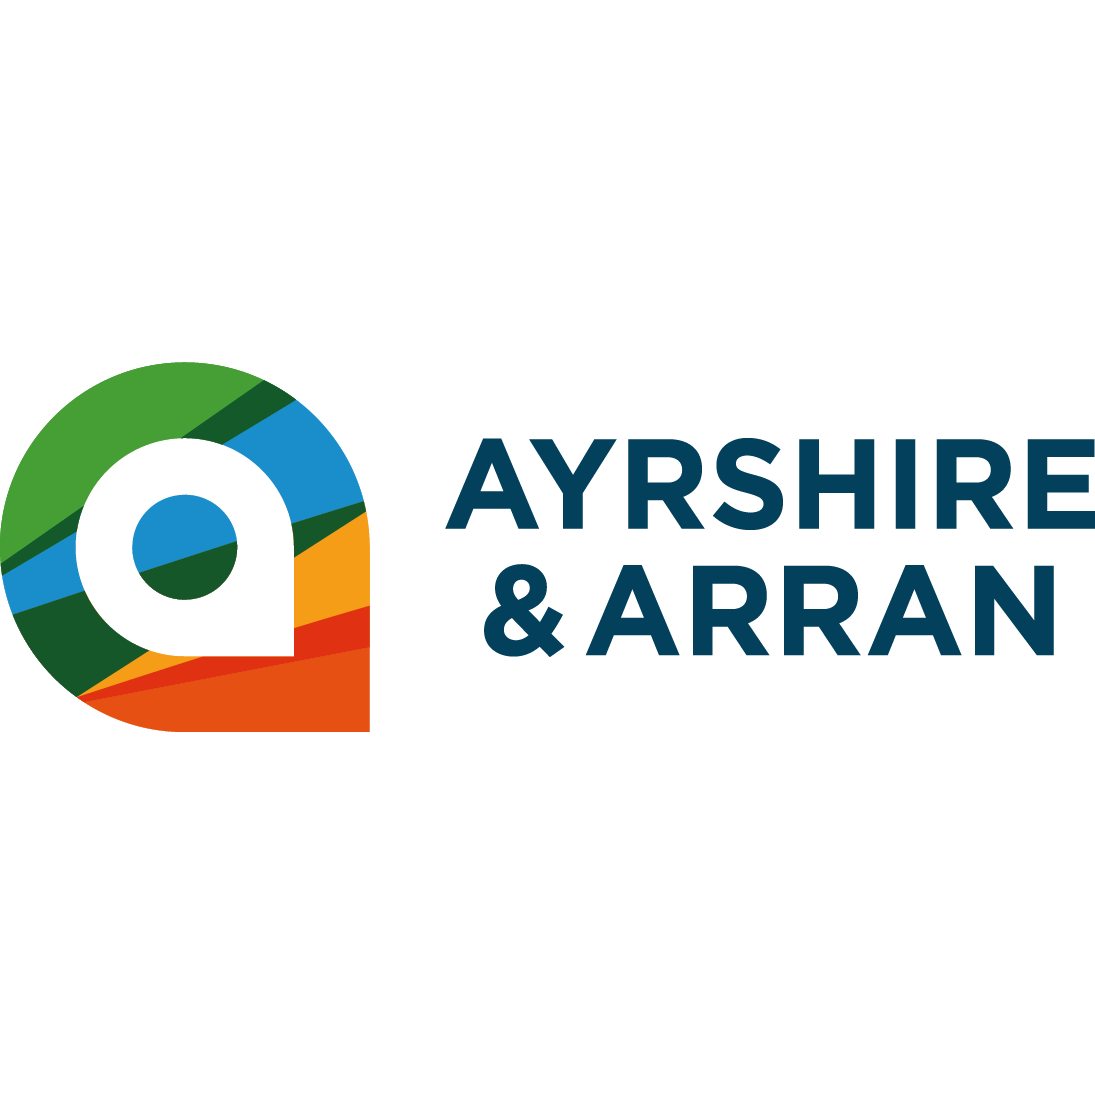 Graphic link to Ayrshire and Arran Destination Alliance website